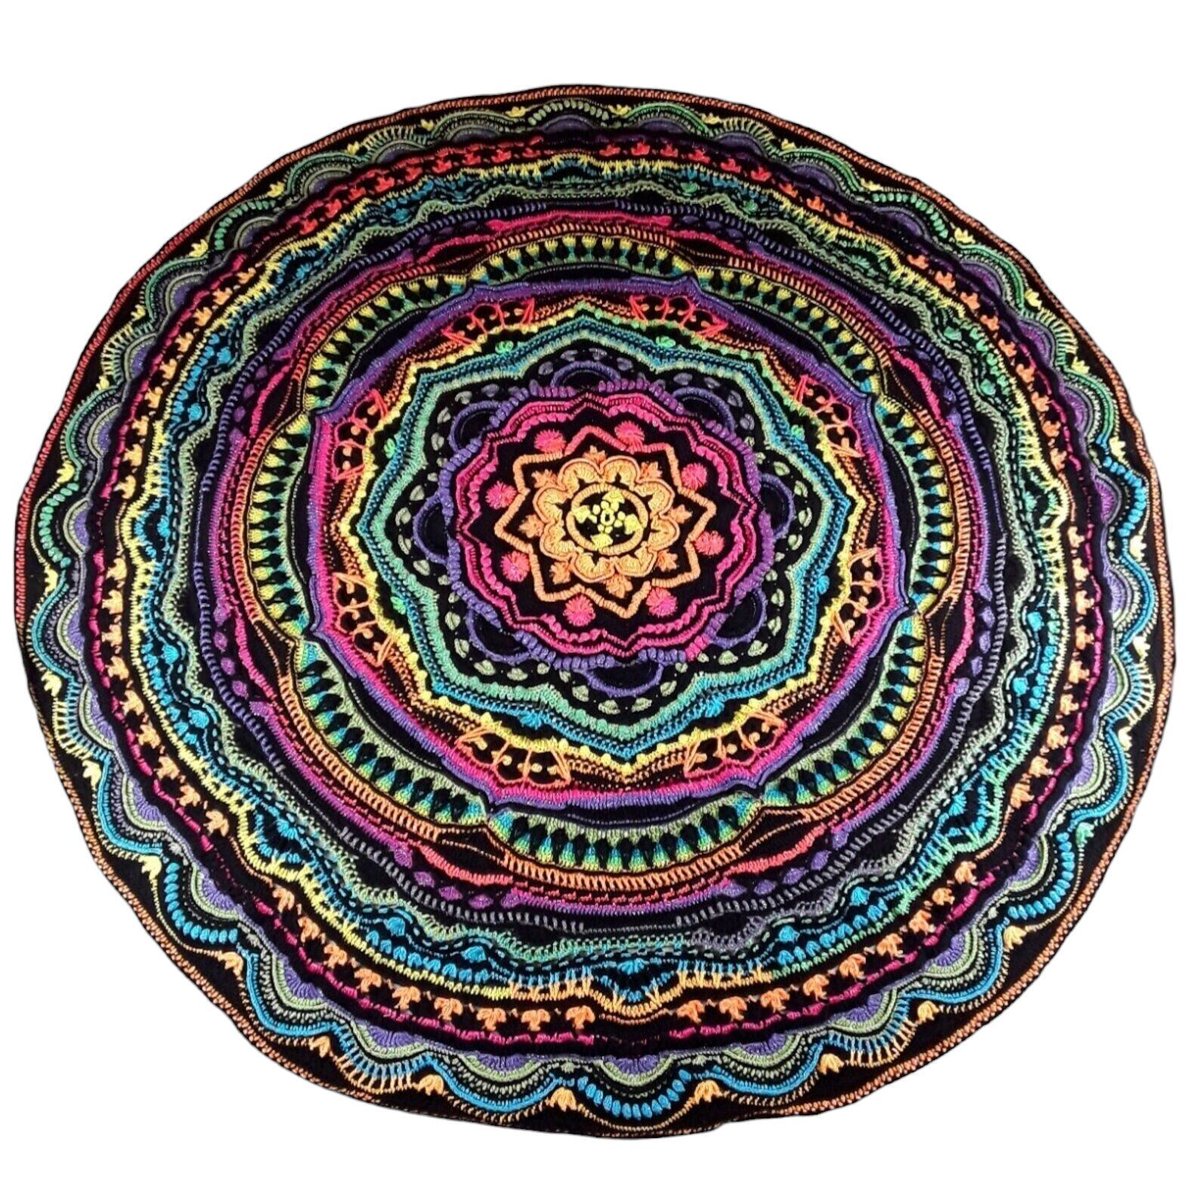 #MHHSBD 𝗖𝗼𝗹𝗼𝘂𝗿𝗳𝘂𝗹 𝗖𝗿𝗼𝗰𝗵𝗲𝘁𝗲𝗱 𝗧𝗵𝗿𝗼𝘄 Stunning Large Circular Crochet Mandala Throw for double beds. Made with black and multicolored yarn, offering mesmerizing textures. Ideal for beds or sofas, measuring nearly 6ft across. knittingtopia.etsy.com/listing/168537…